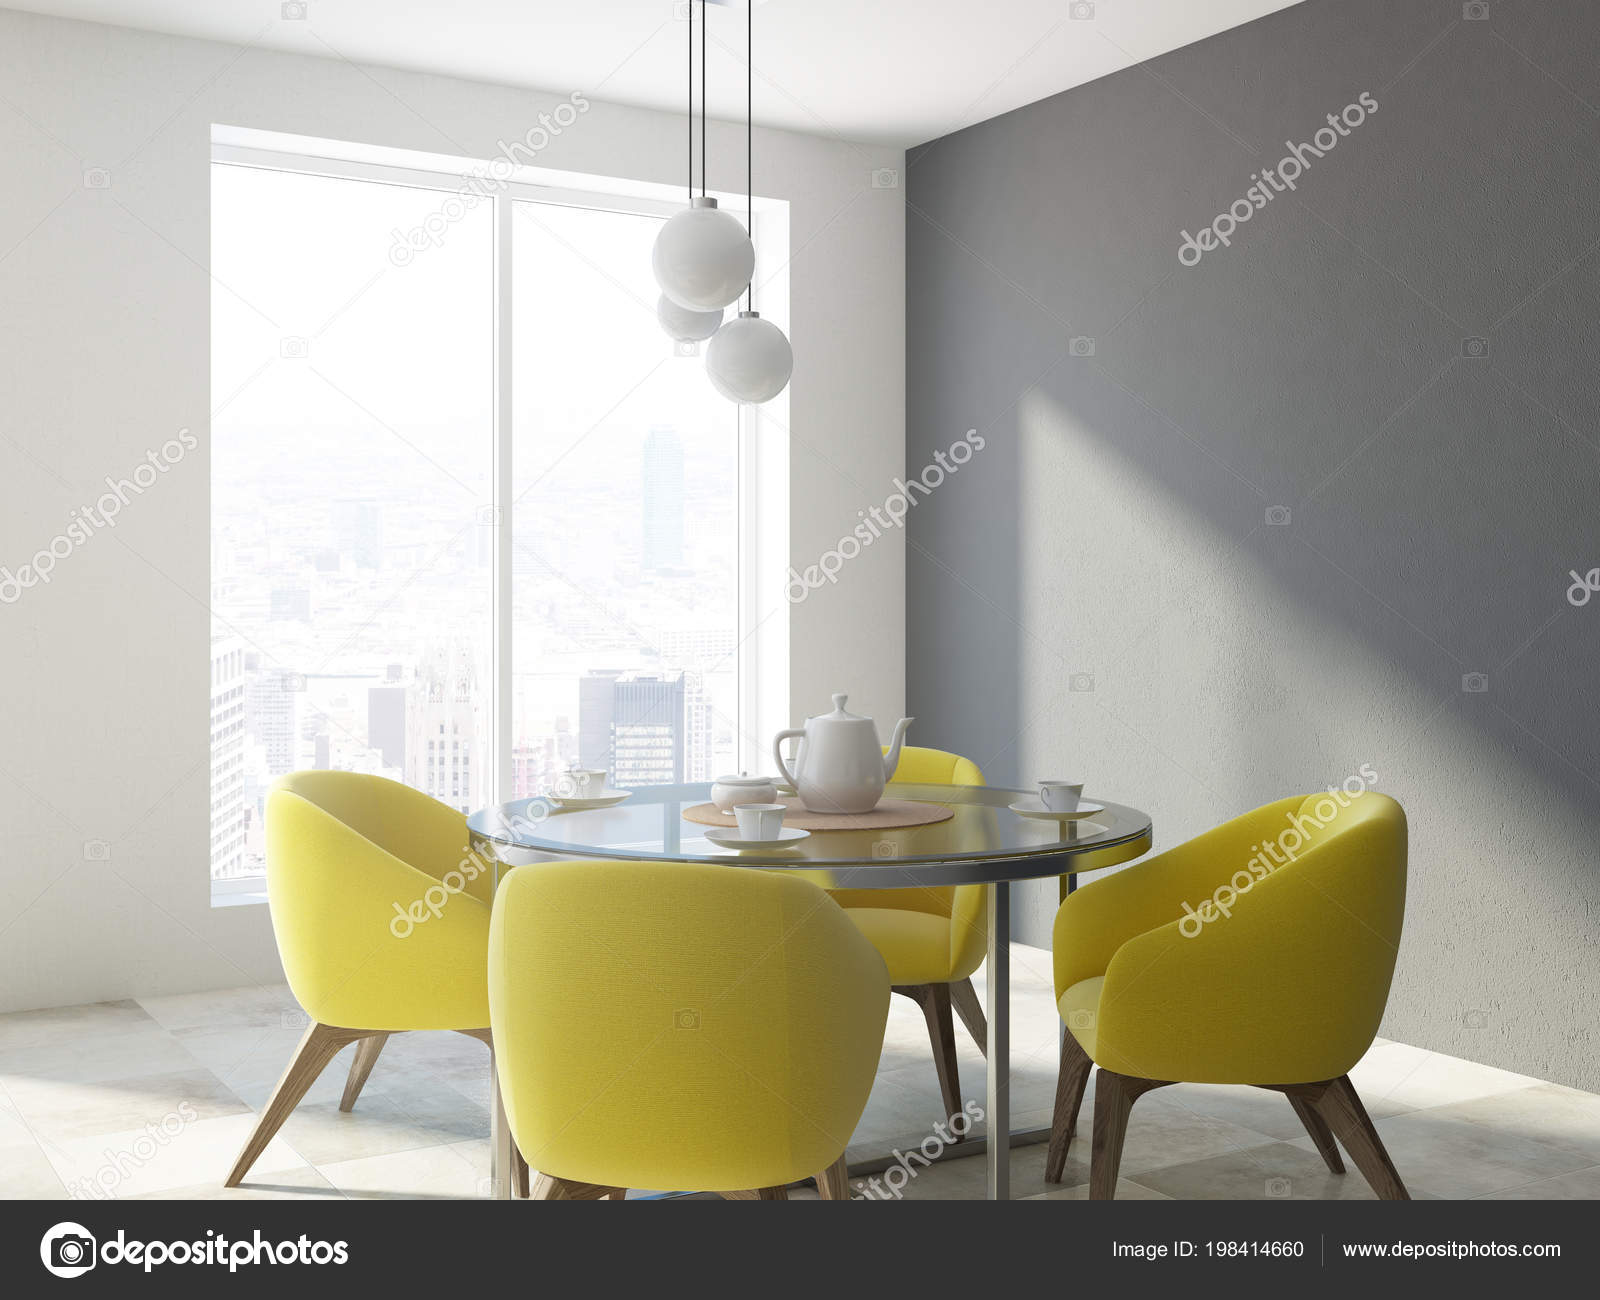 Classic White Gray Wall Dining Room, Yellow And Gray Chairs For Dining Room